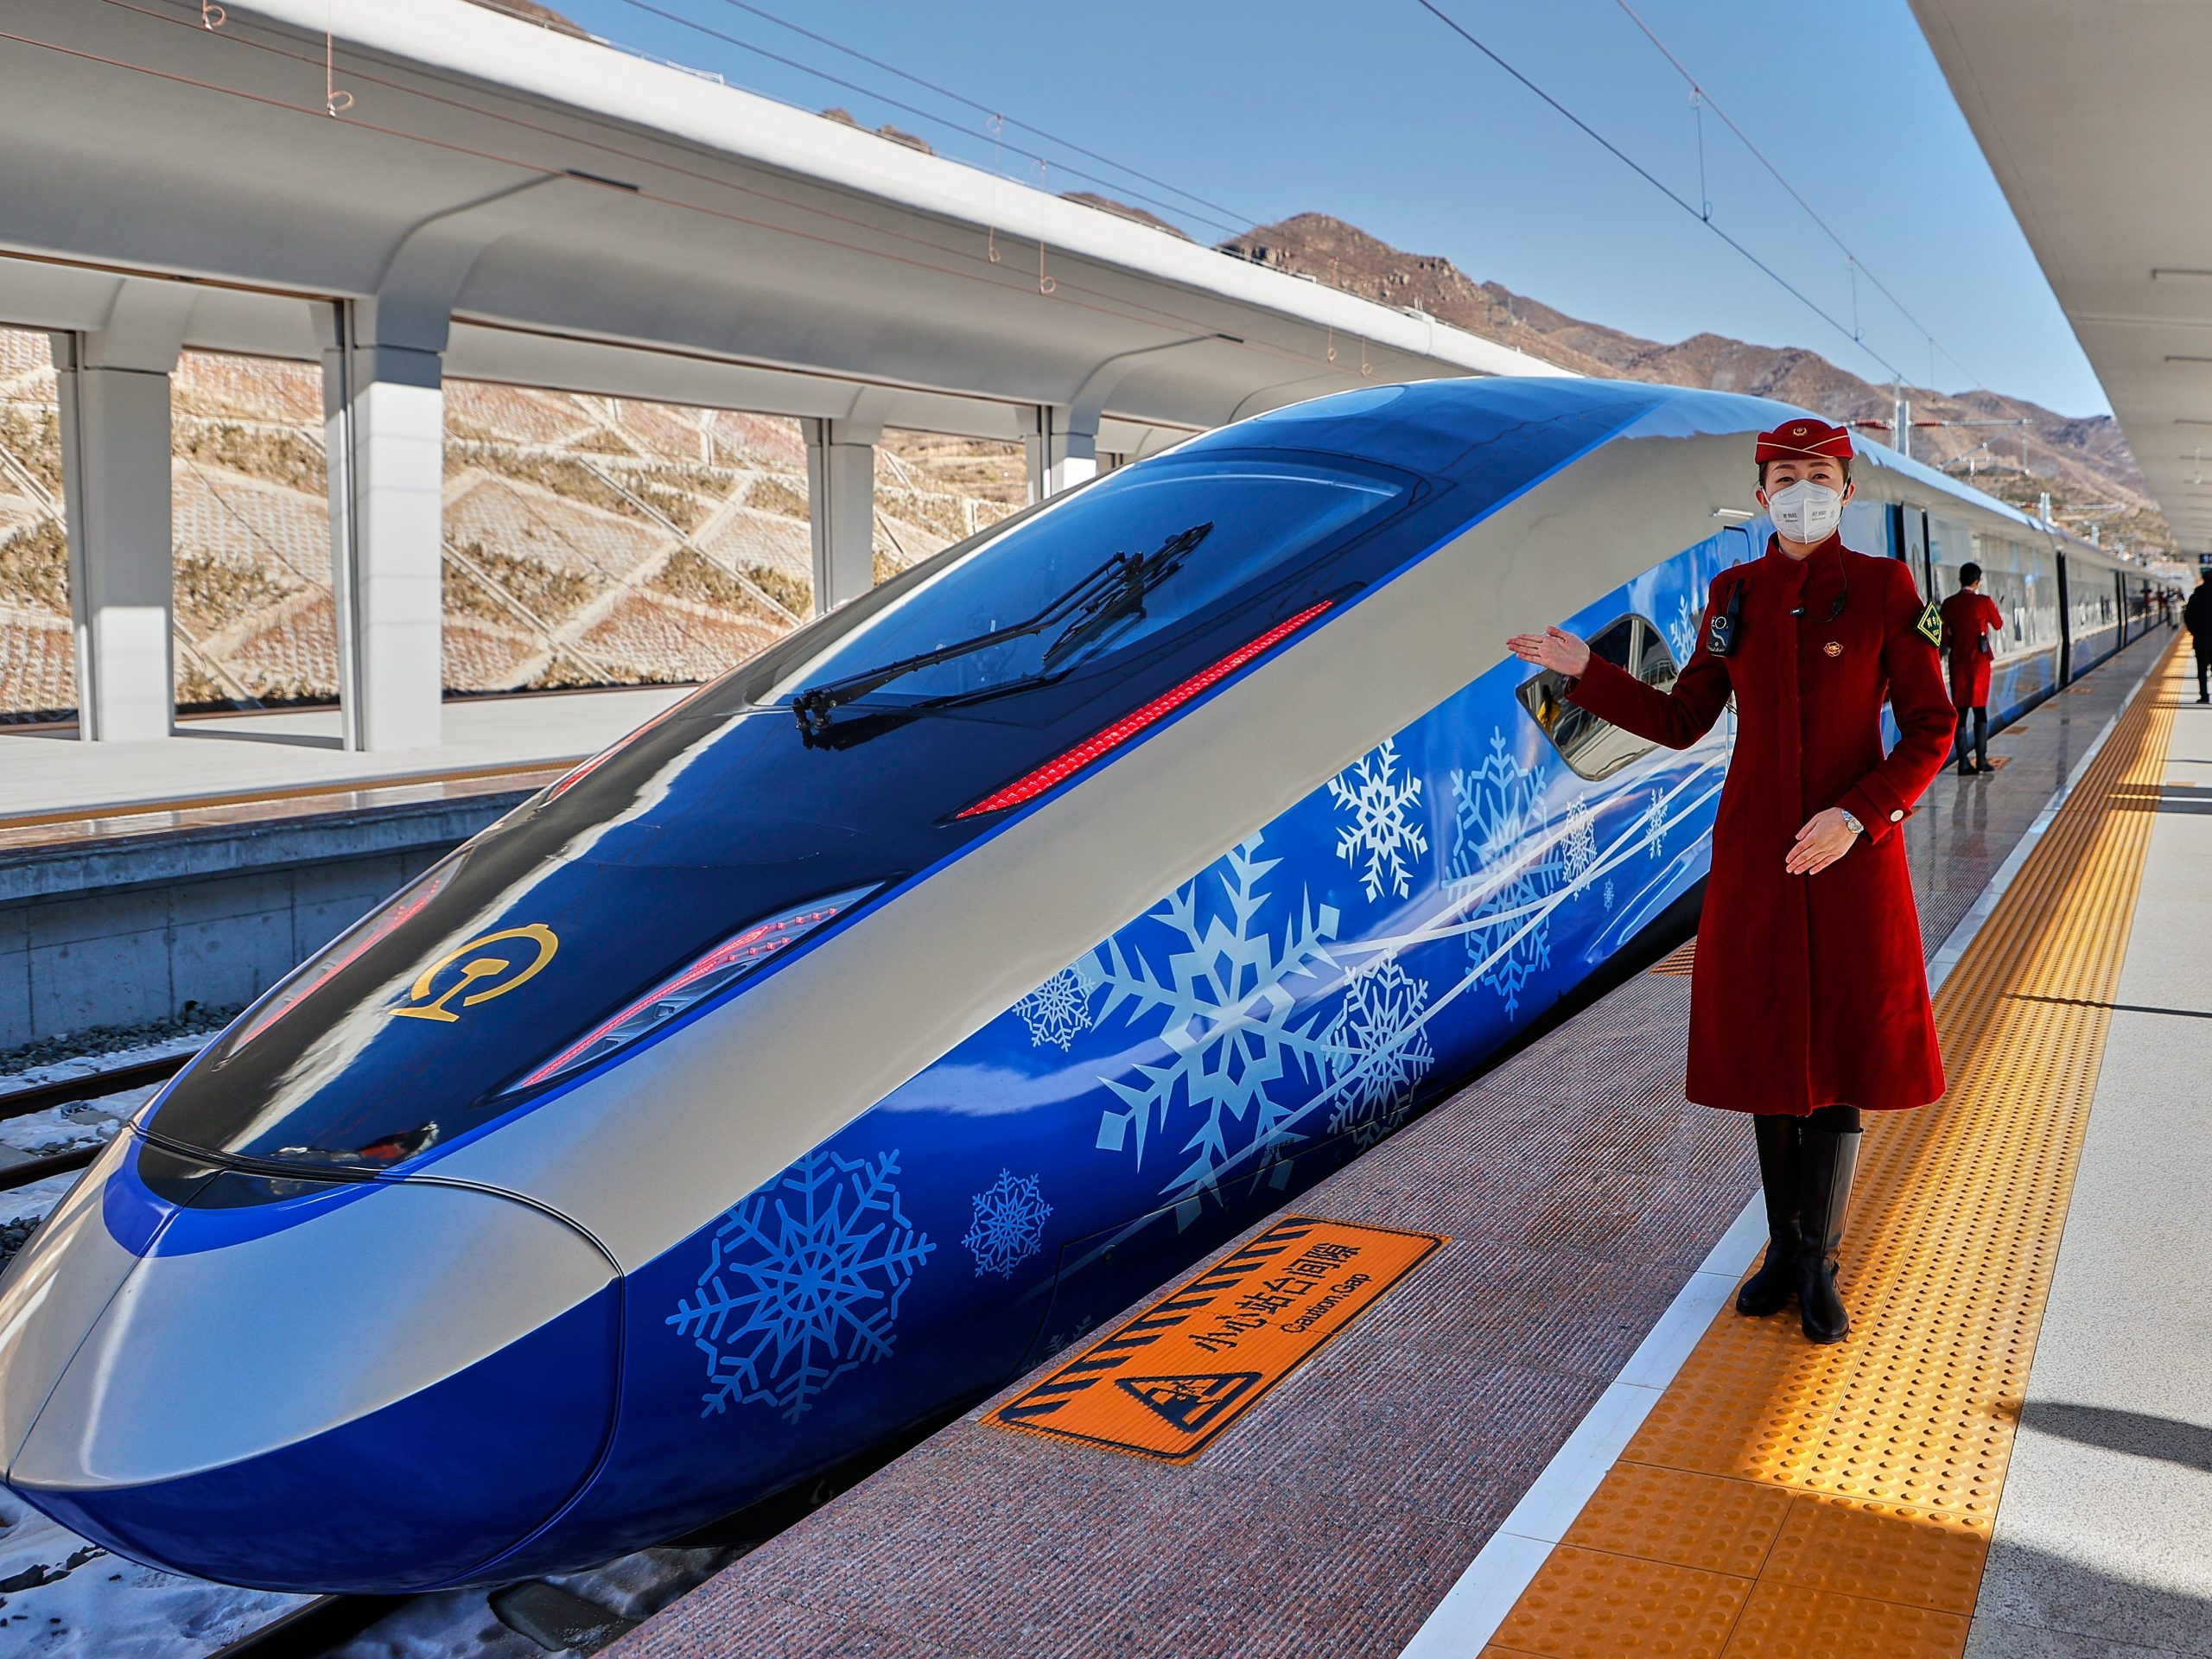 A train attendant poses beside an intelligent Fuxing bullet train decorated with a Winter Olympics-themed coating at Chongli Railway Station on January 6, 2022 in Zhangjiakou, Hebei Province of China.